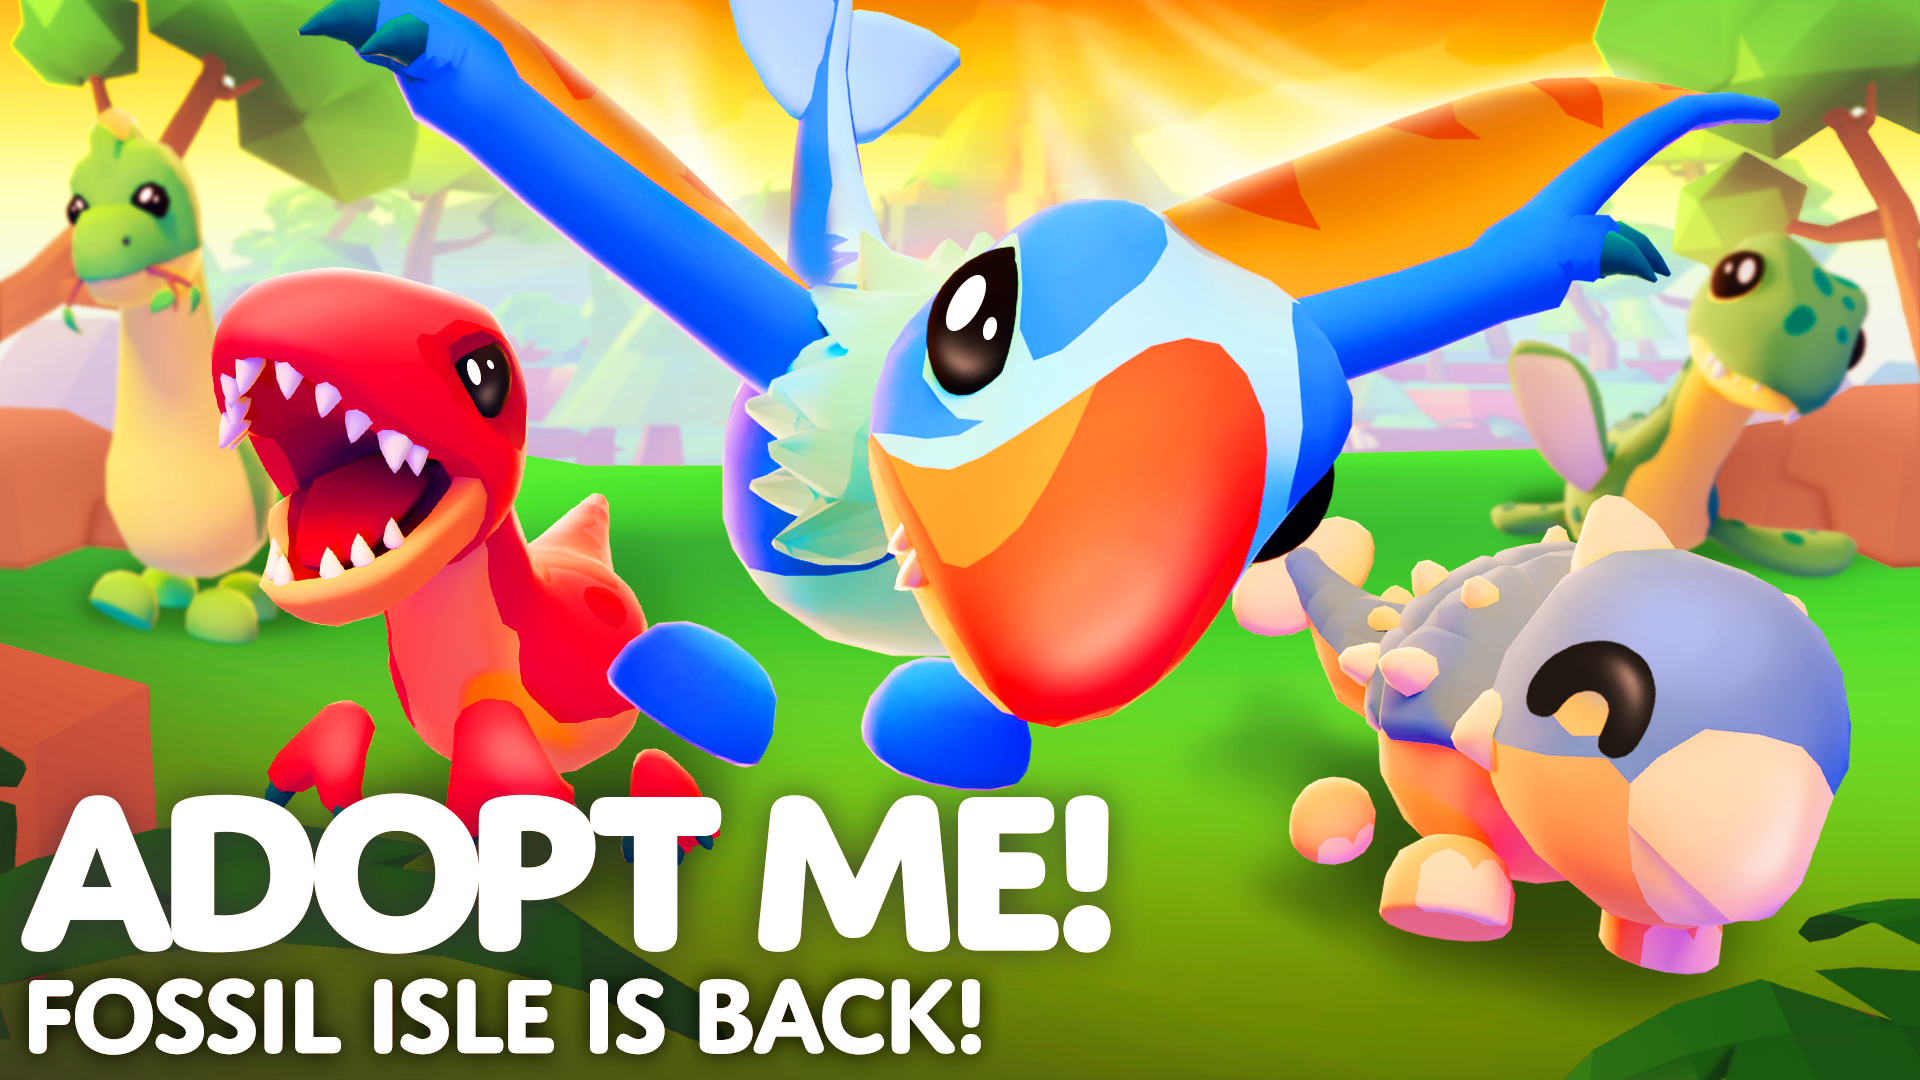 Adopt Me Thumbnail that reads: Fossil Isle Is Back! A dynamic photo of the new Dinosaurs: the Dimorphodon, an orange and blue dino with a beak flying at the camera with the green Brachiosaurus, red Velociraptor, smiling blue Ankylosaurus, and green Elasmosaurus all surrounding them. 